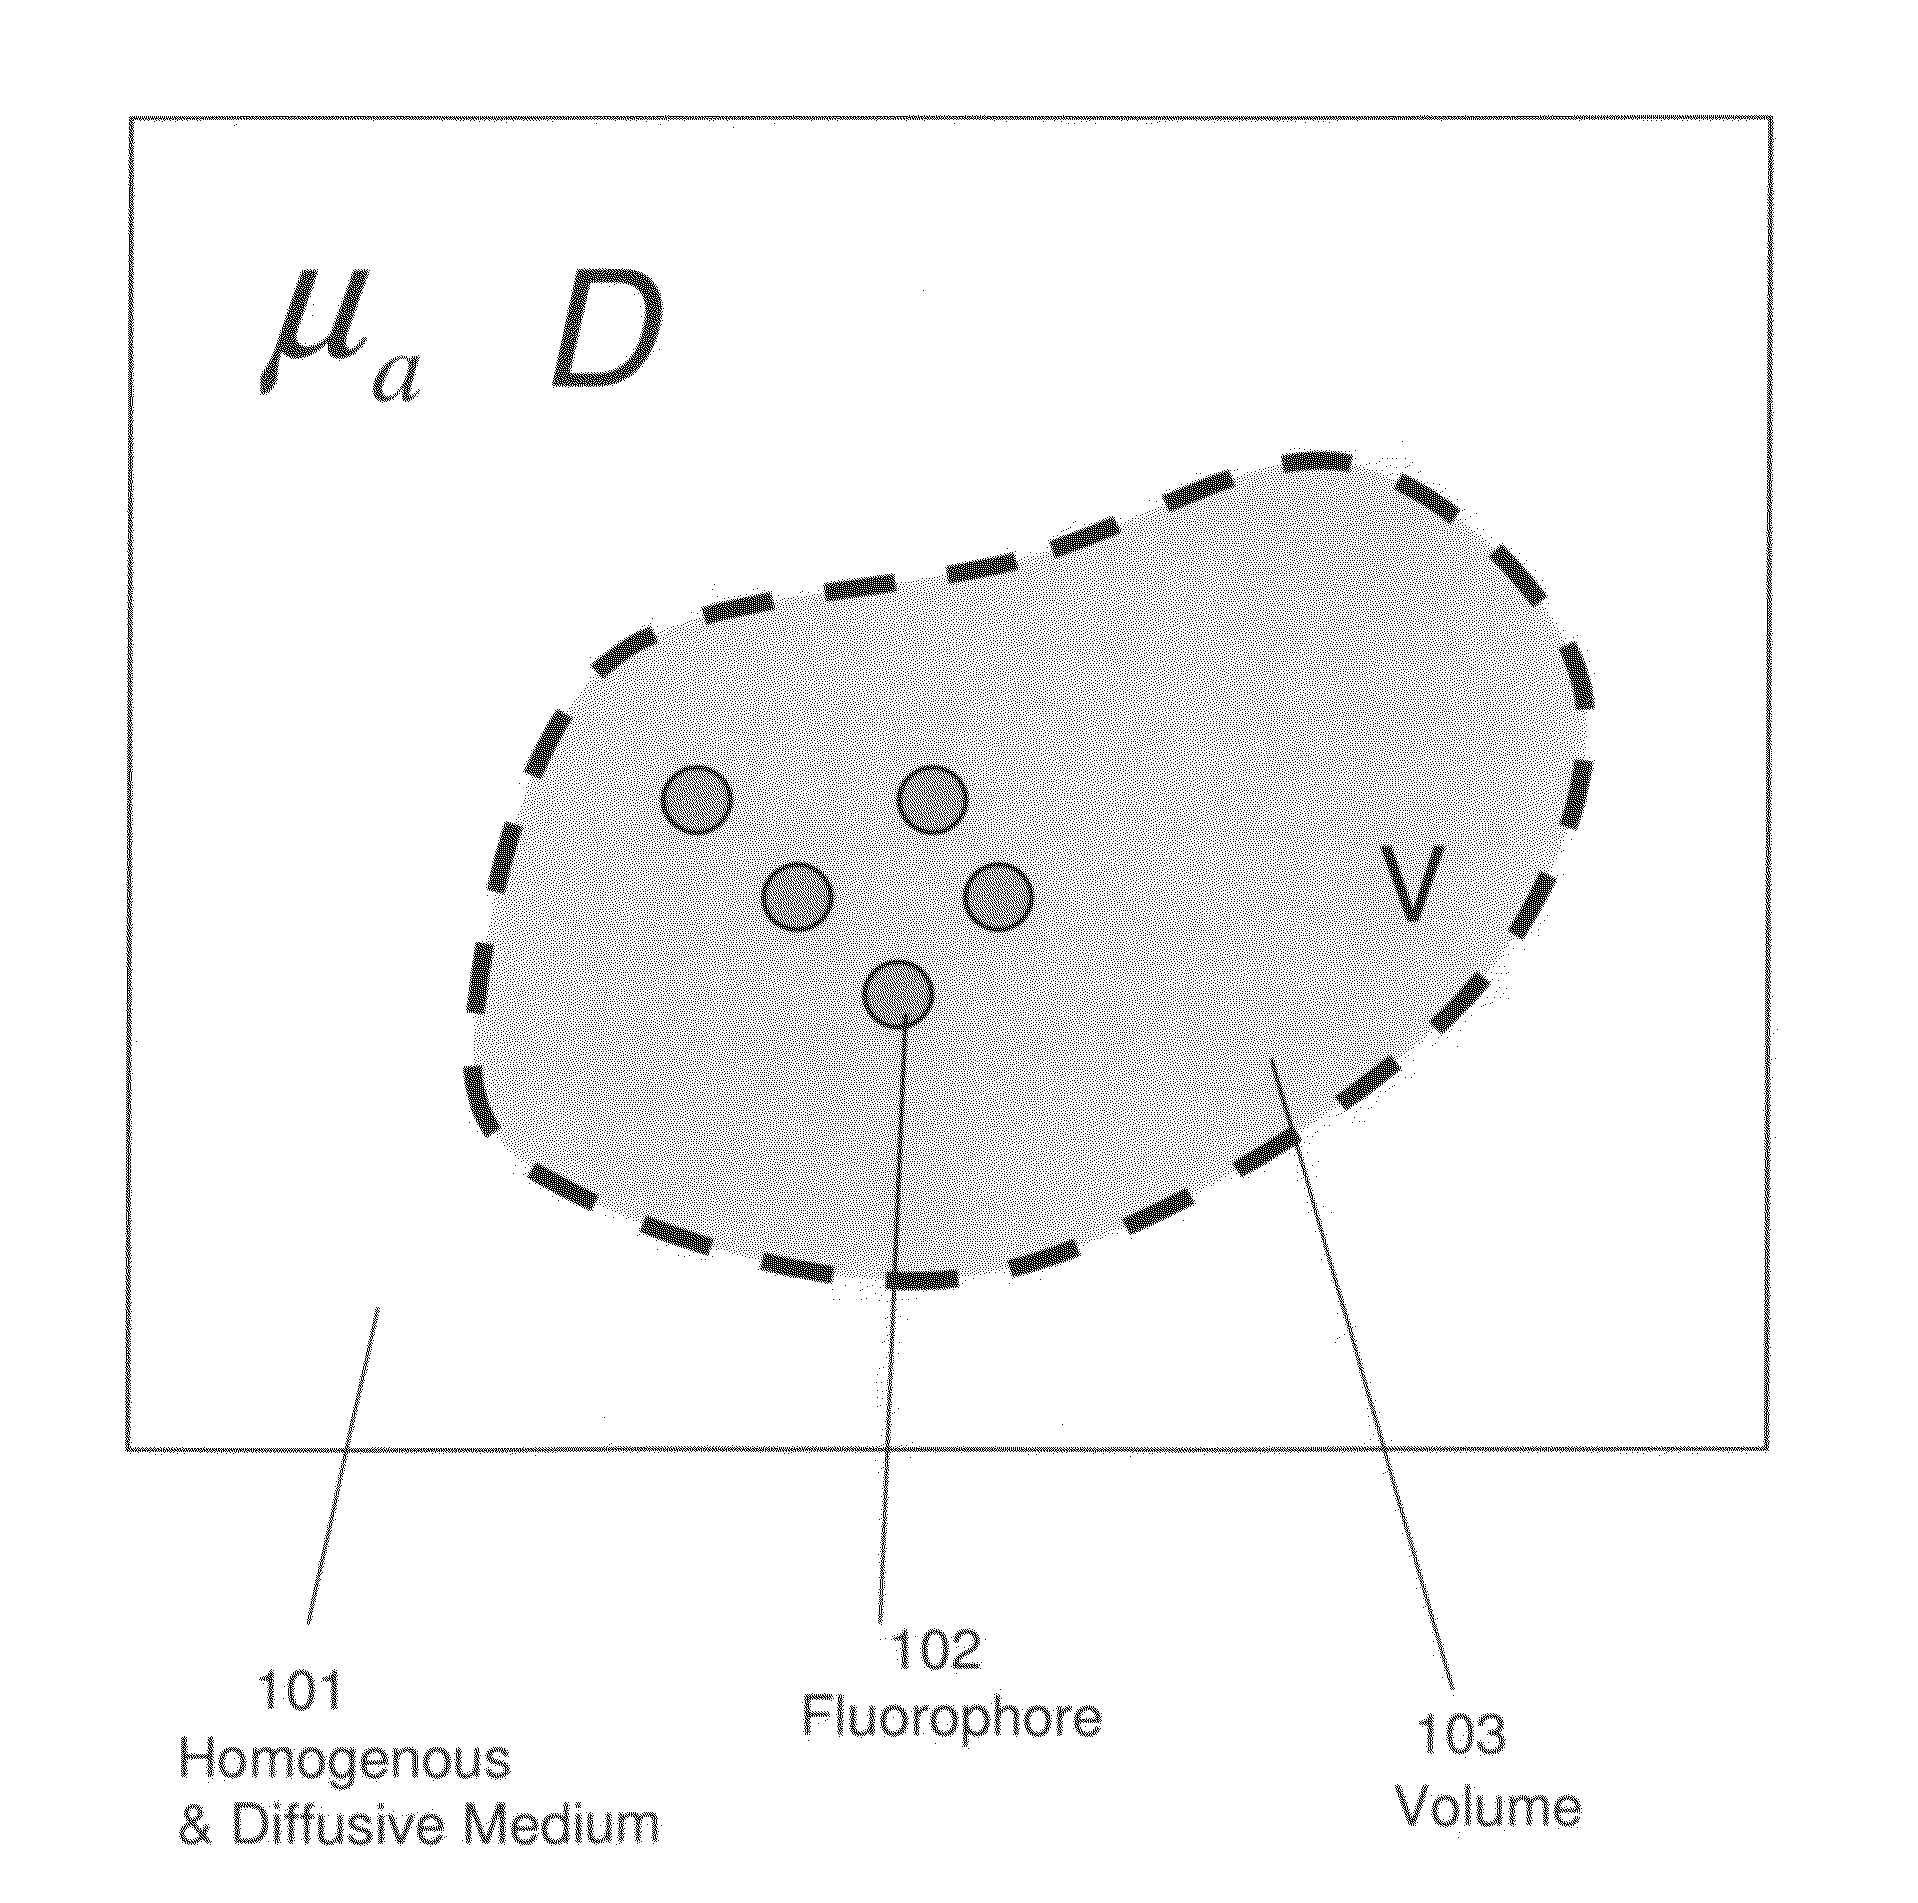 Systems and methods for tomographic imaging in diffuse media using a hybrid inversion technique